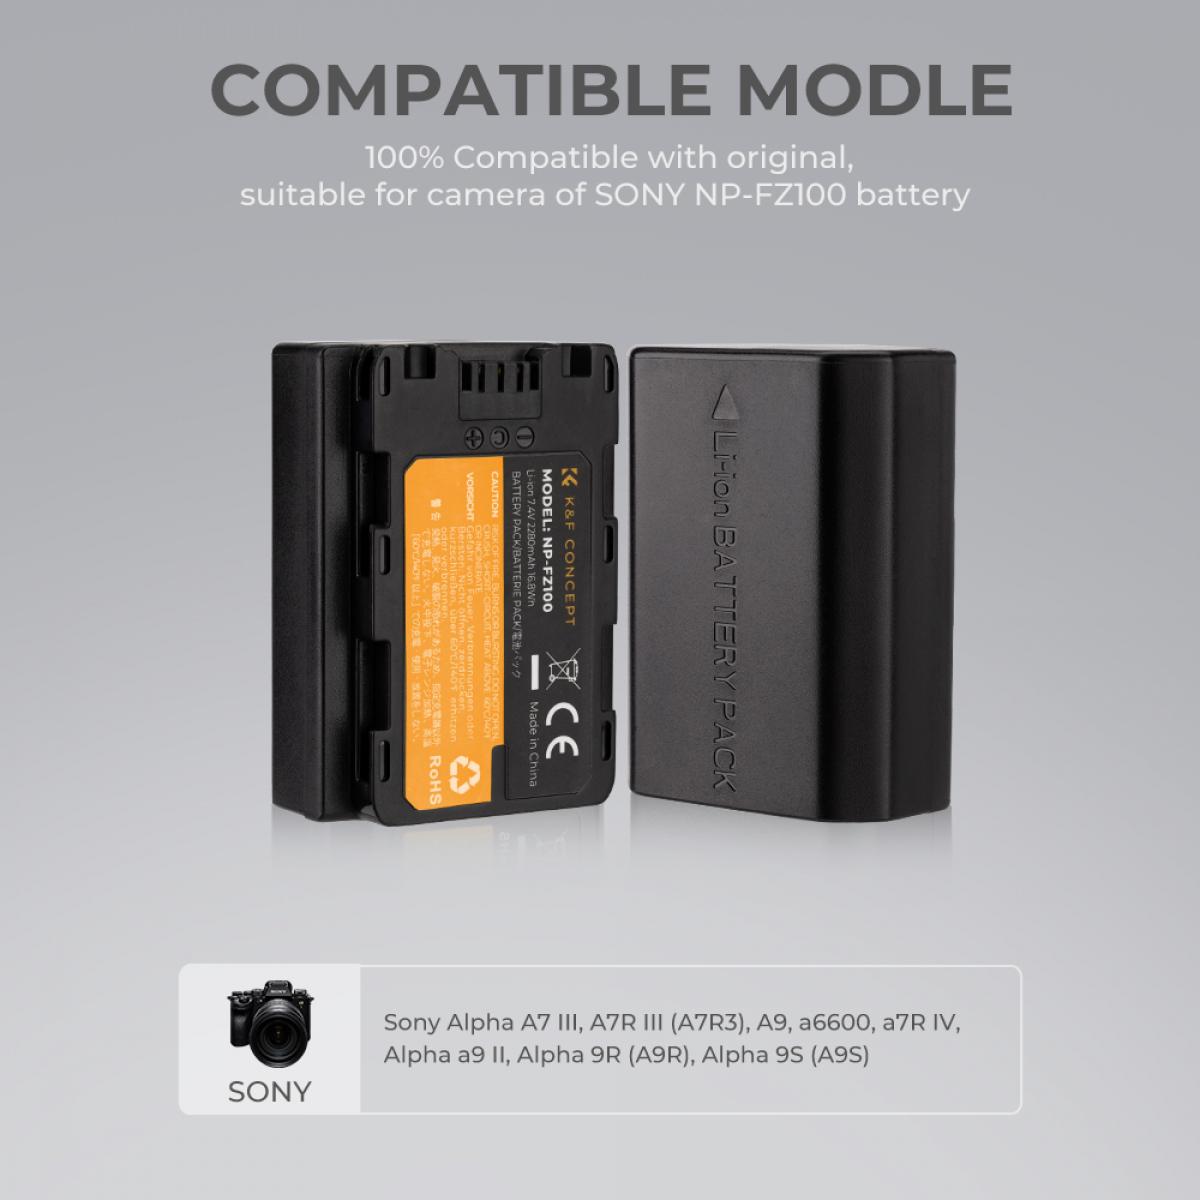 K&F Concept NP-FZ100 sony battery and dual slot battery charger kit